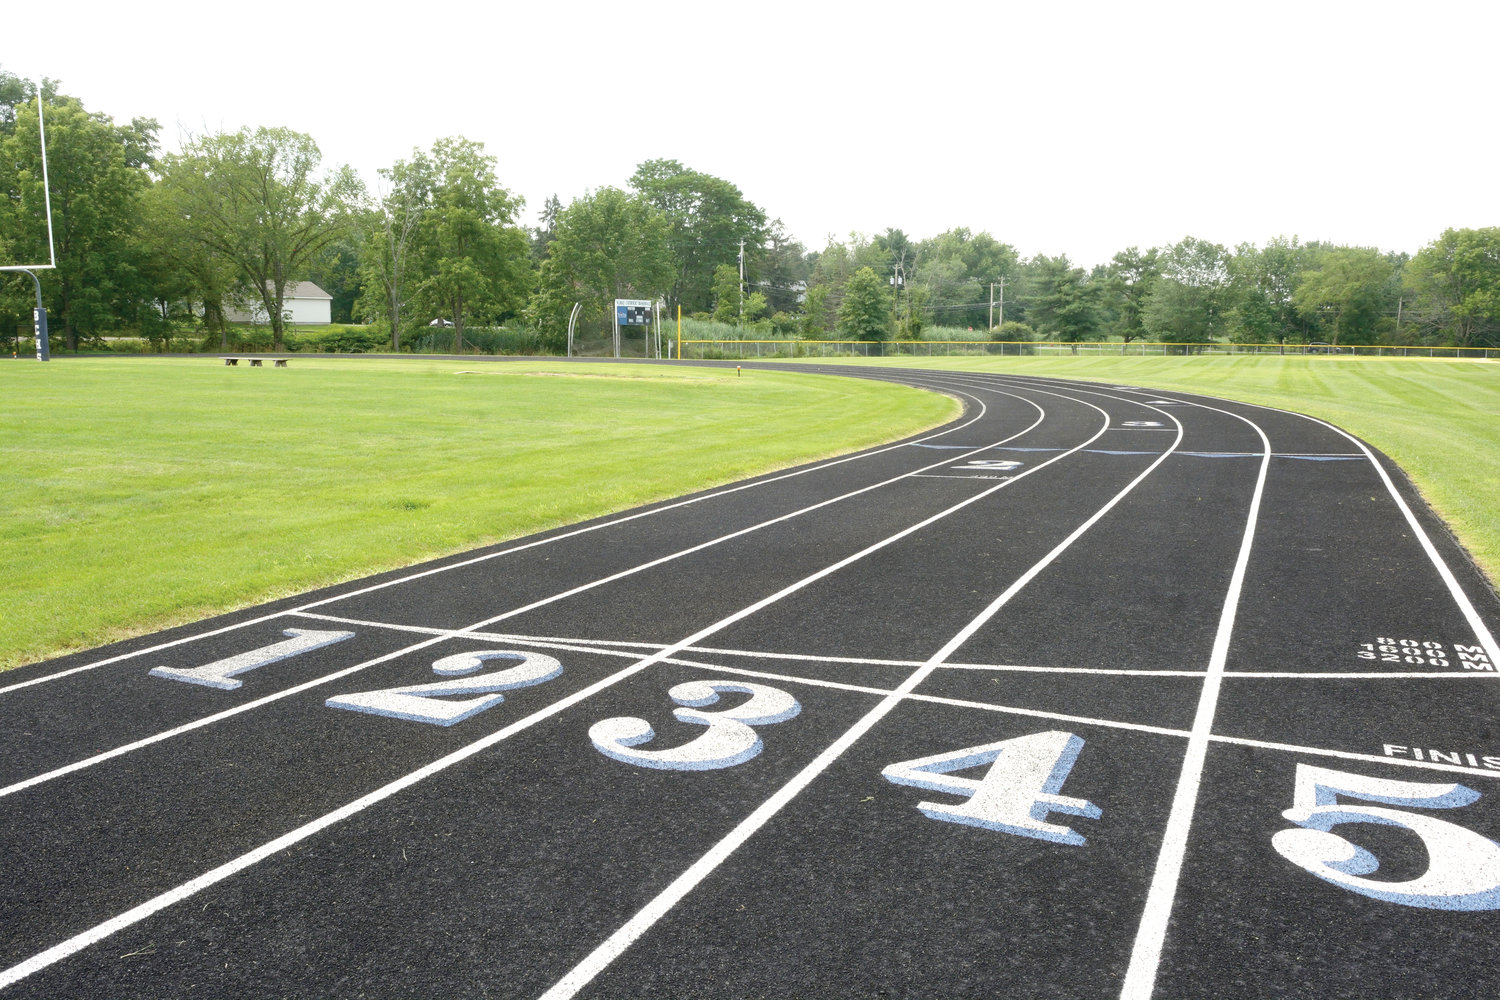 TRACK MEETS ON CAMPUS—A track, pictured July 20, was renovated to give John S. Burke Catholic High School the opportunity to host track and field meets for the first time in 15 years on its 62-acre Goshen campus in 2019.